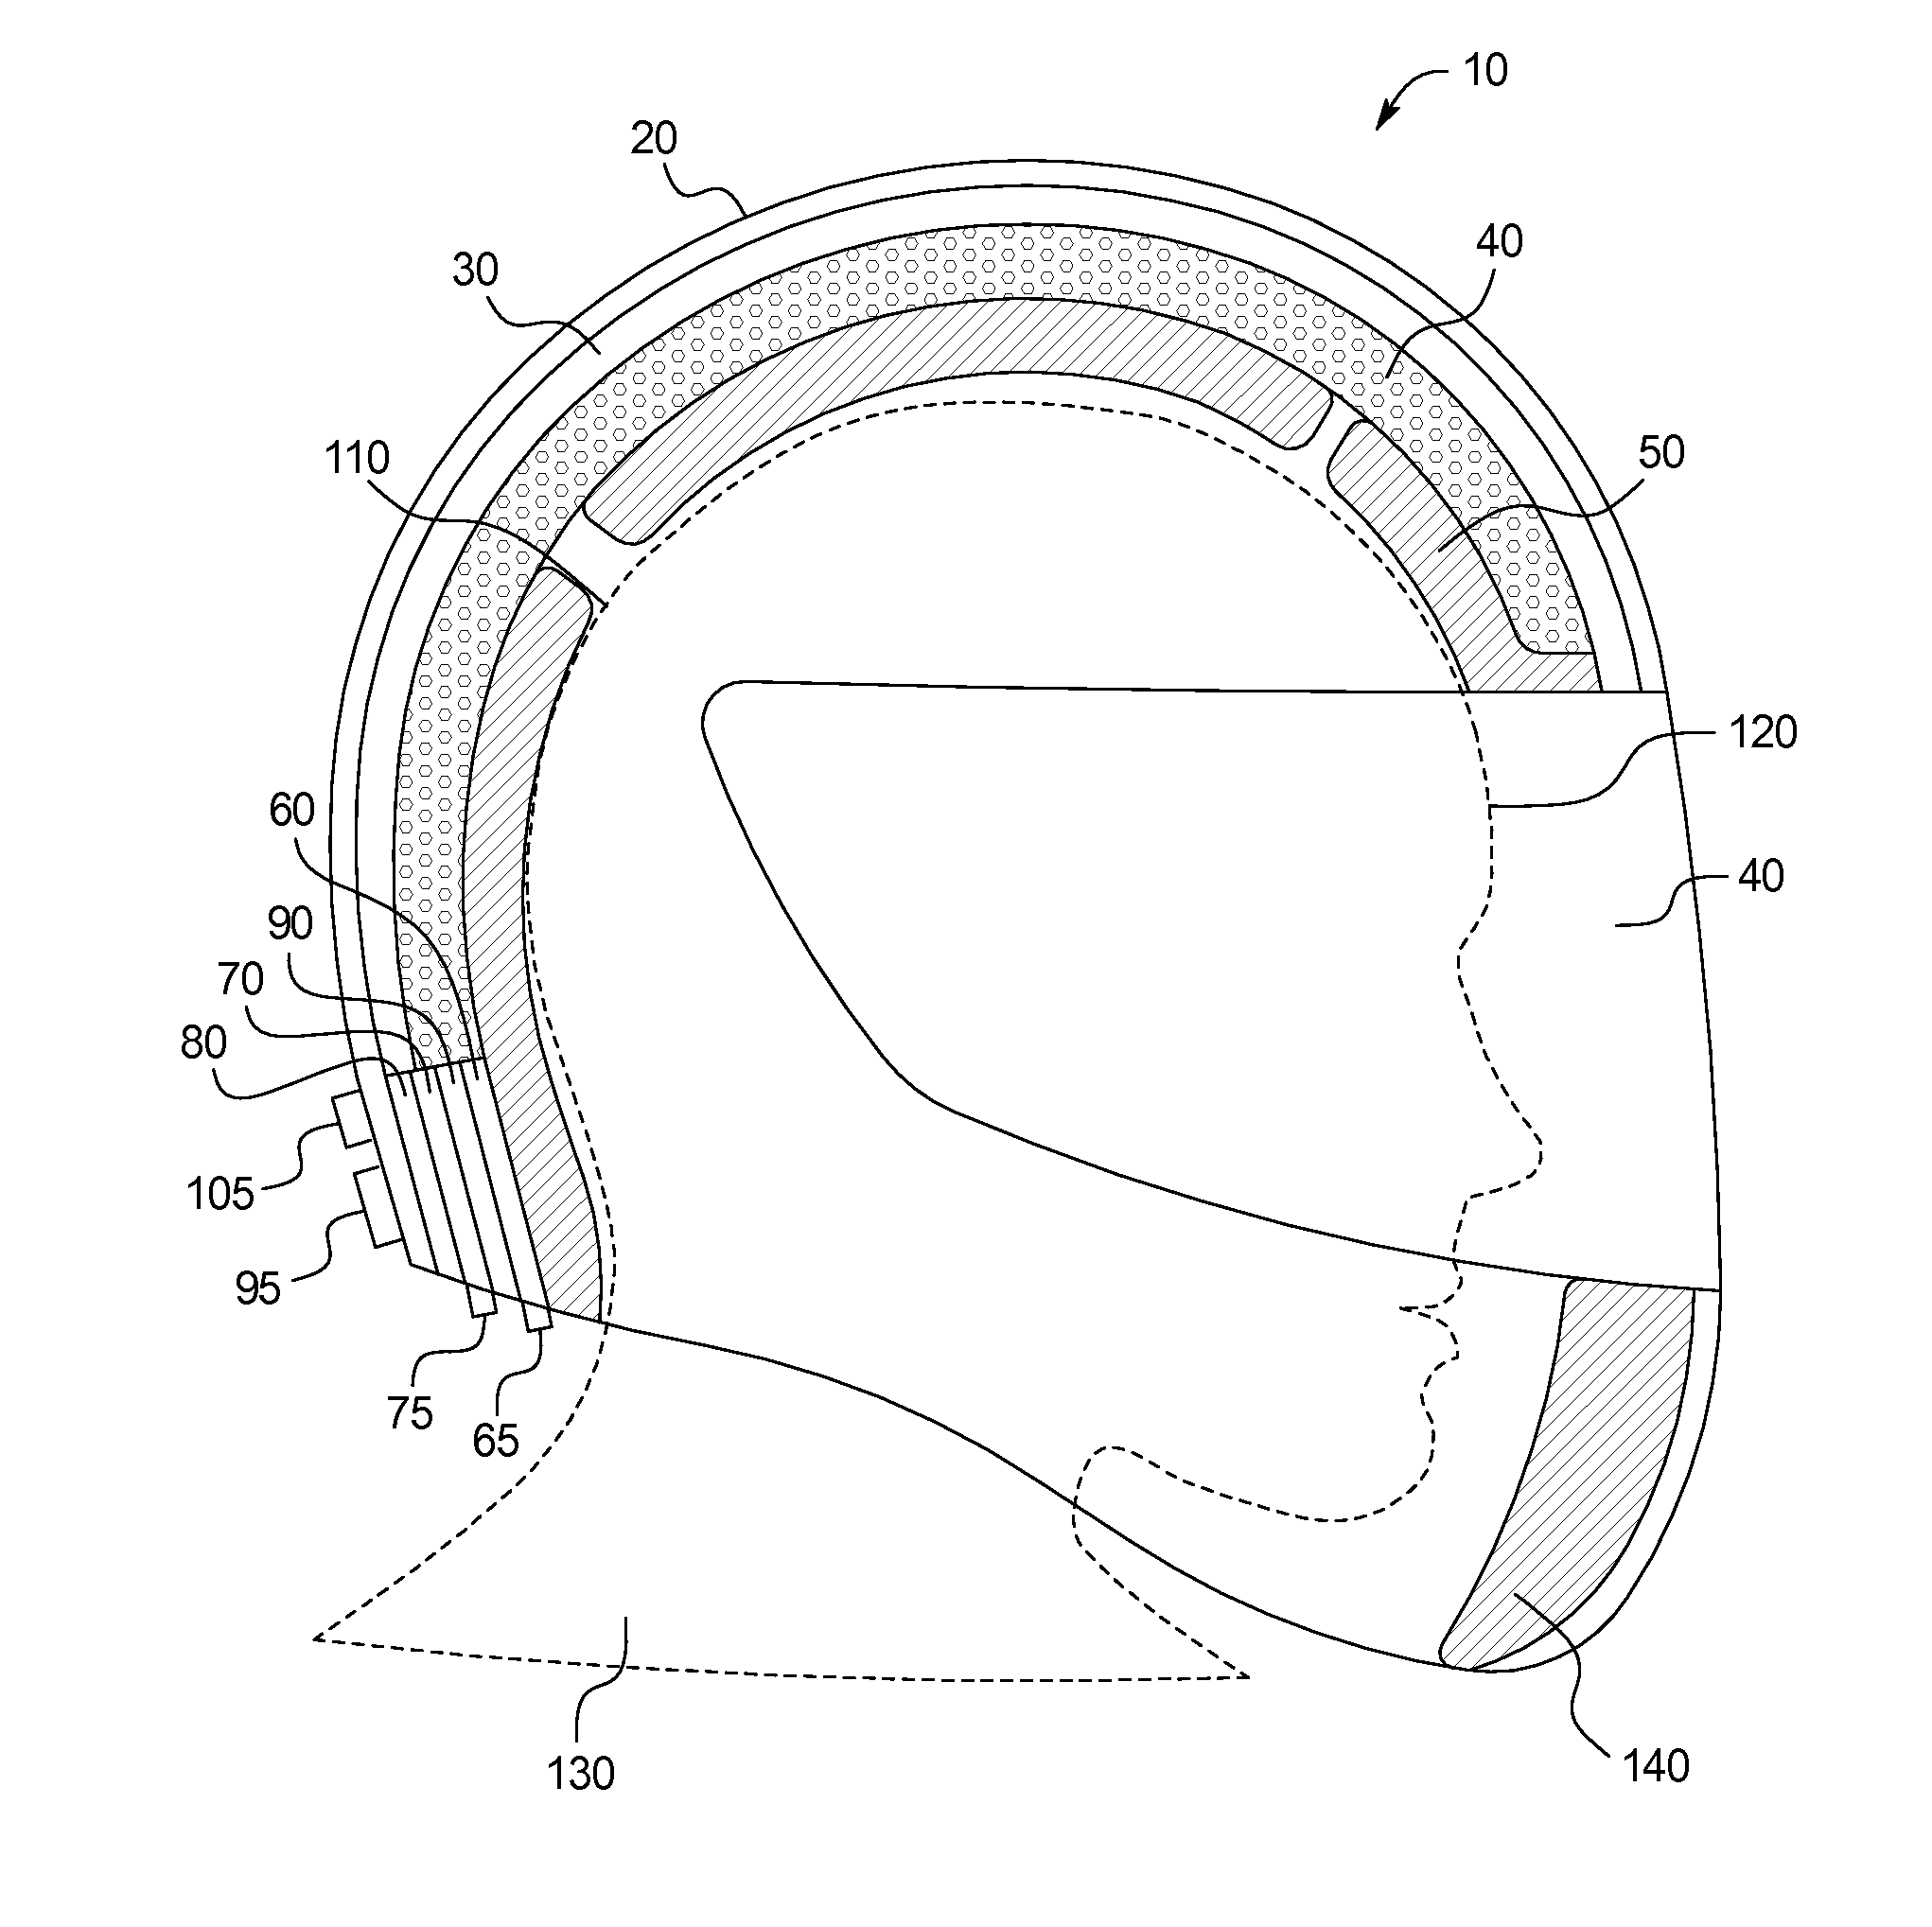 Safety helmet with dynamic visual display